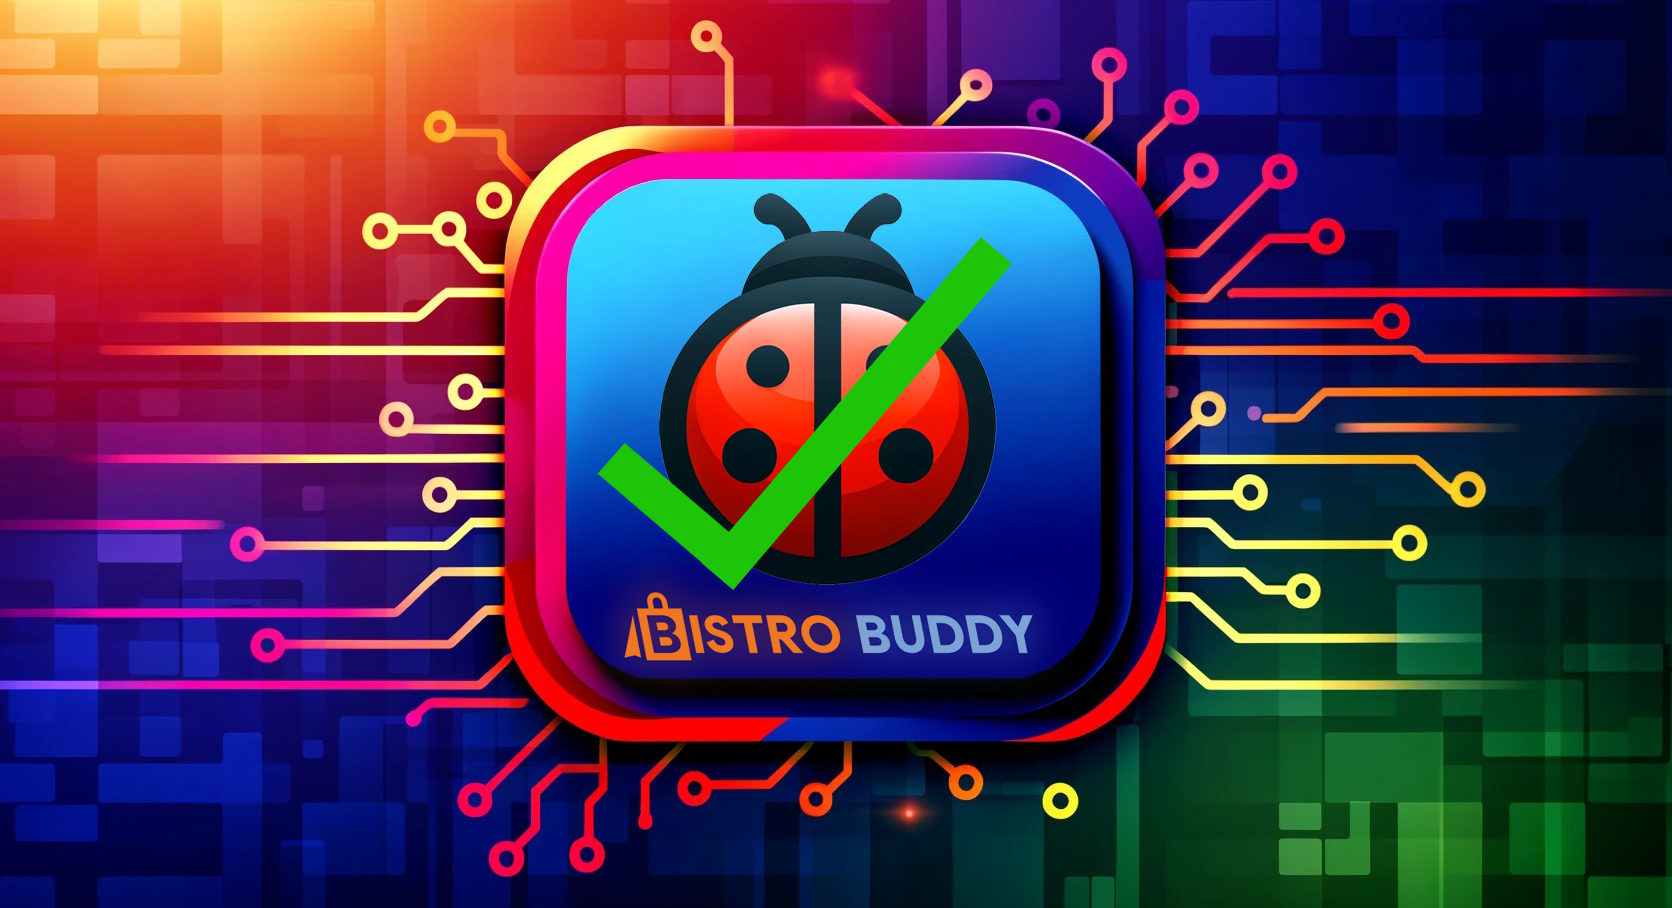 BISTRO BUDDY Version 2.0.1 Community Beta: User Registration Hotfixes and Exclusive Discount Codes